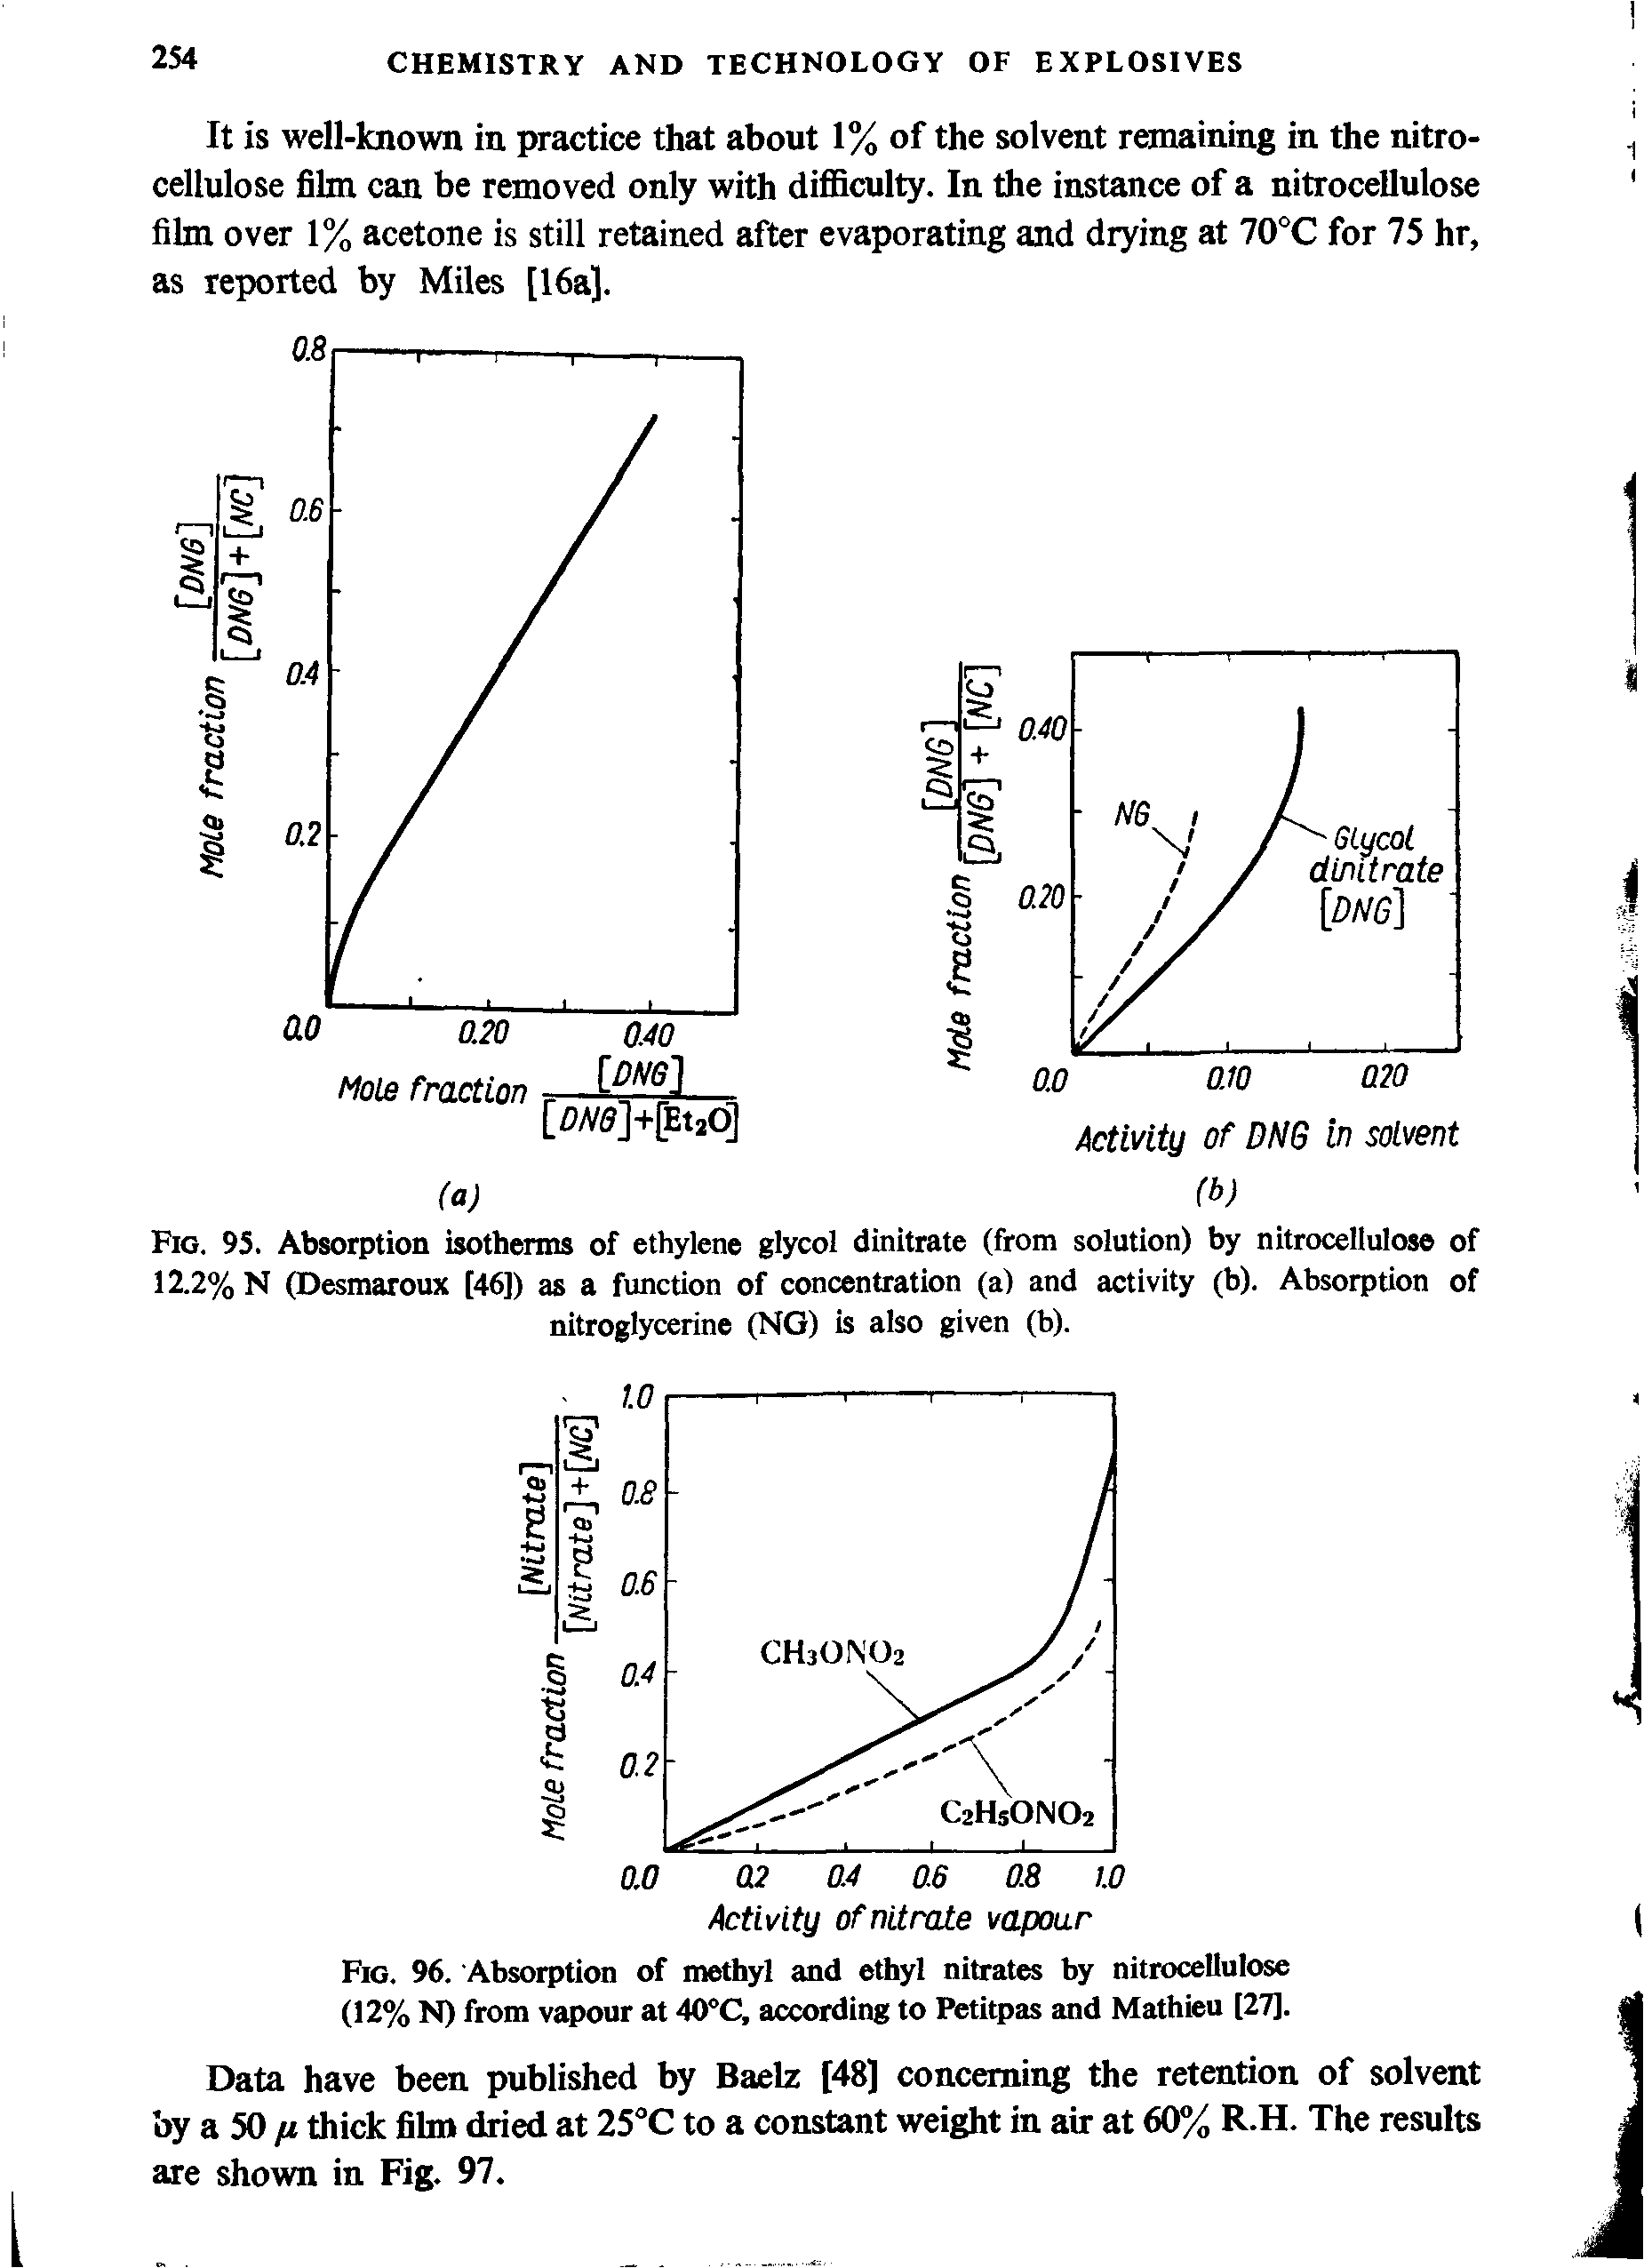 Fig. 95. Absorption isotherms of ethylene glycol dinitrate (from solution) by nitrocellulose of 12.2% N (Desmaroux [46]) as a function of concentration (a) and activity (b). Absorption of nitroglycerine (NG) is also given (b).